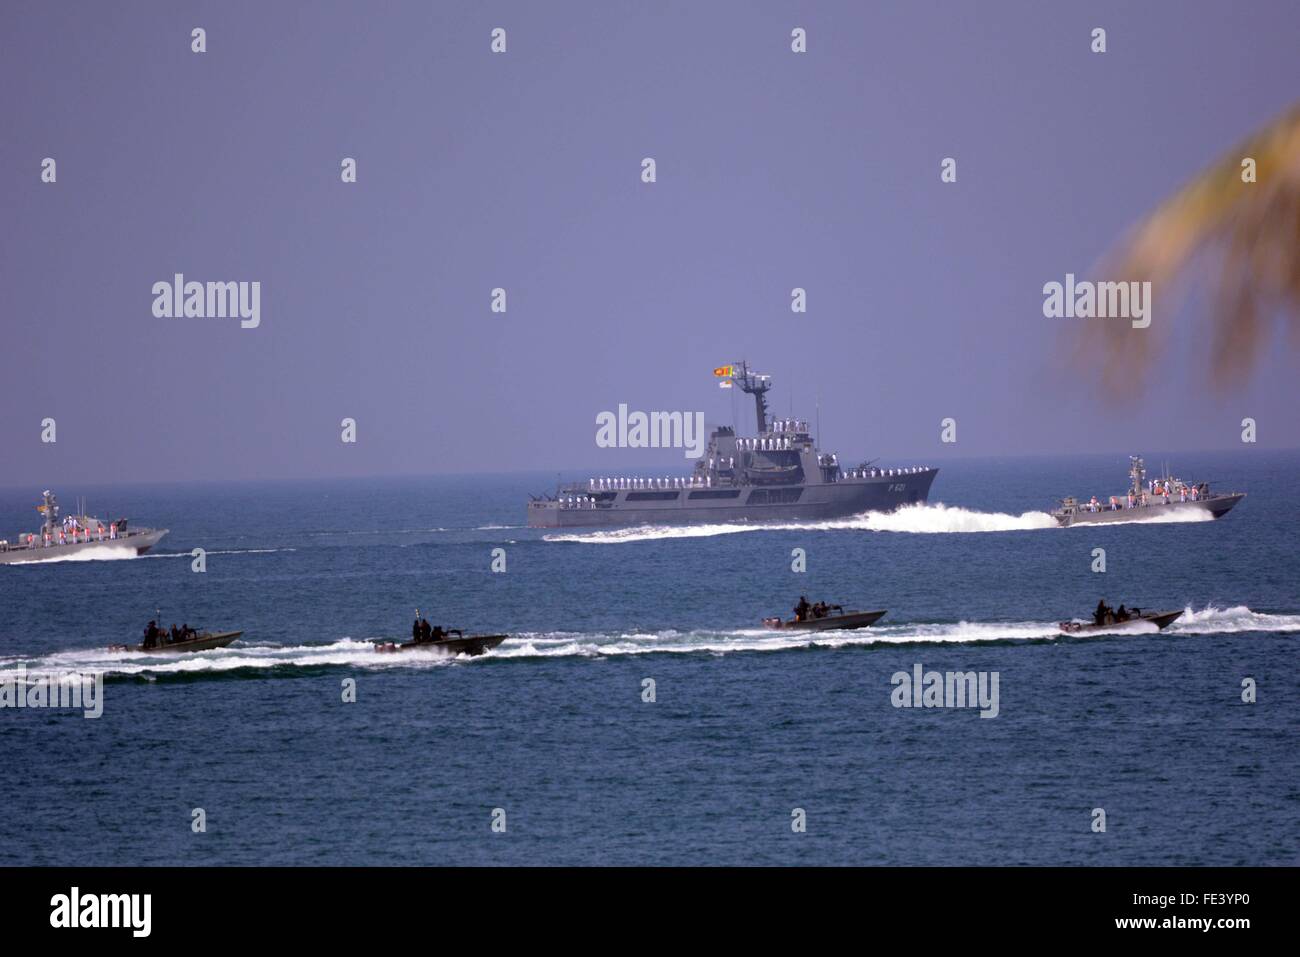 Colombo, Sri Lanka. 4th Feb, 2016. Sri Lanka Naval vessels present their defence capabilities during the 68th Independence Day celebration parade in Colombo, capital of Sri Lanka, Feb. 4, 2016. Sri Lanka on Thursday celebrated the 68th anniversary of gaining independence from the British colonial rule in 1948. This year the theme is 'Ekama Deyak, Maha Balayak' (One Nation, Great Power). Credit:  A.Rjhita/Xinhua/Alamy Live News Stock Photo